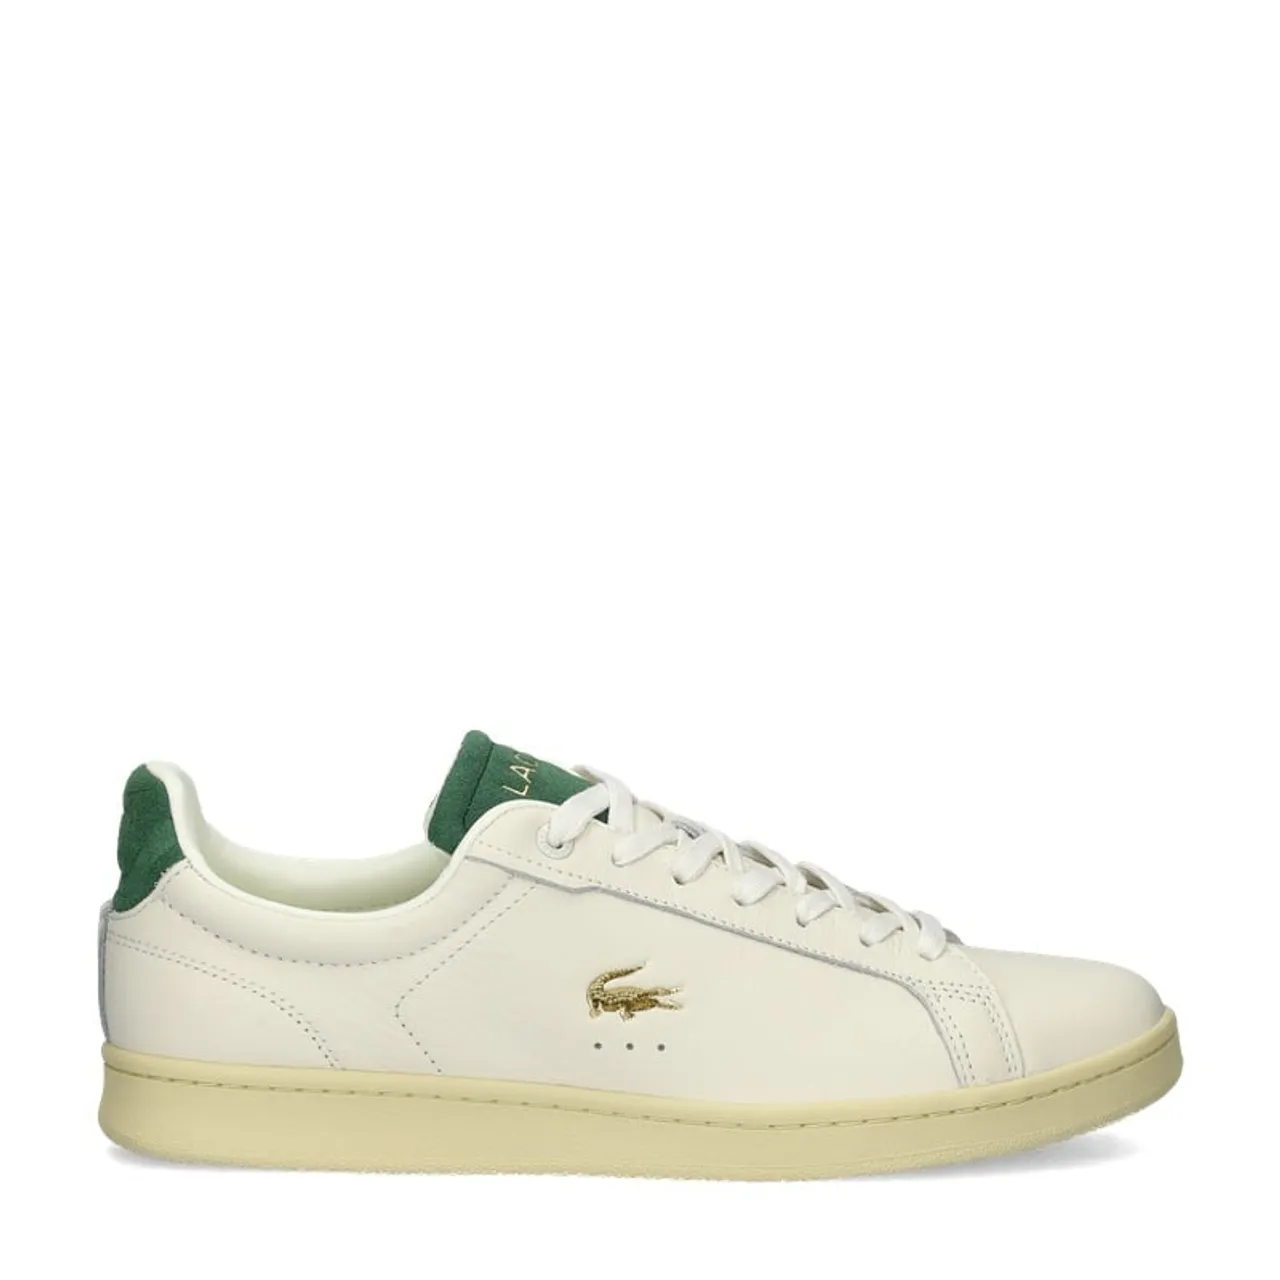 Lacoste Carnaby Pro Luxe lage sneakers